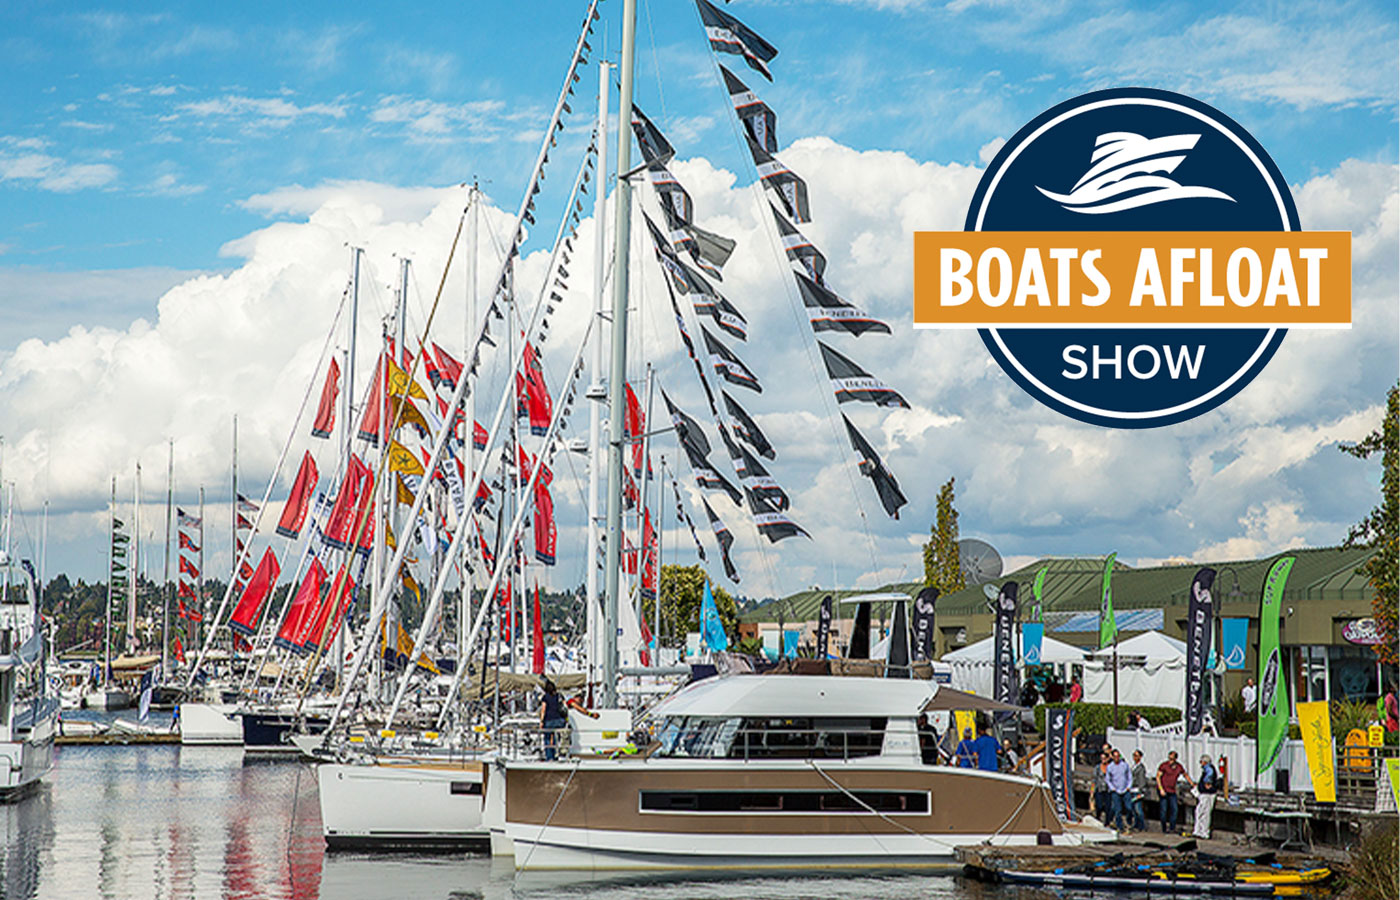 2019 Boats Afloat Show [Boat Show Guide]